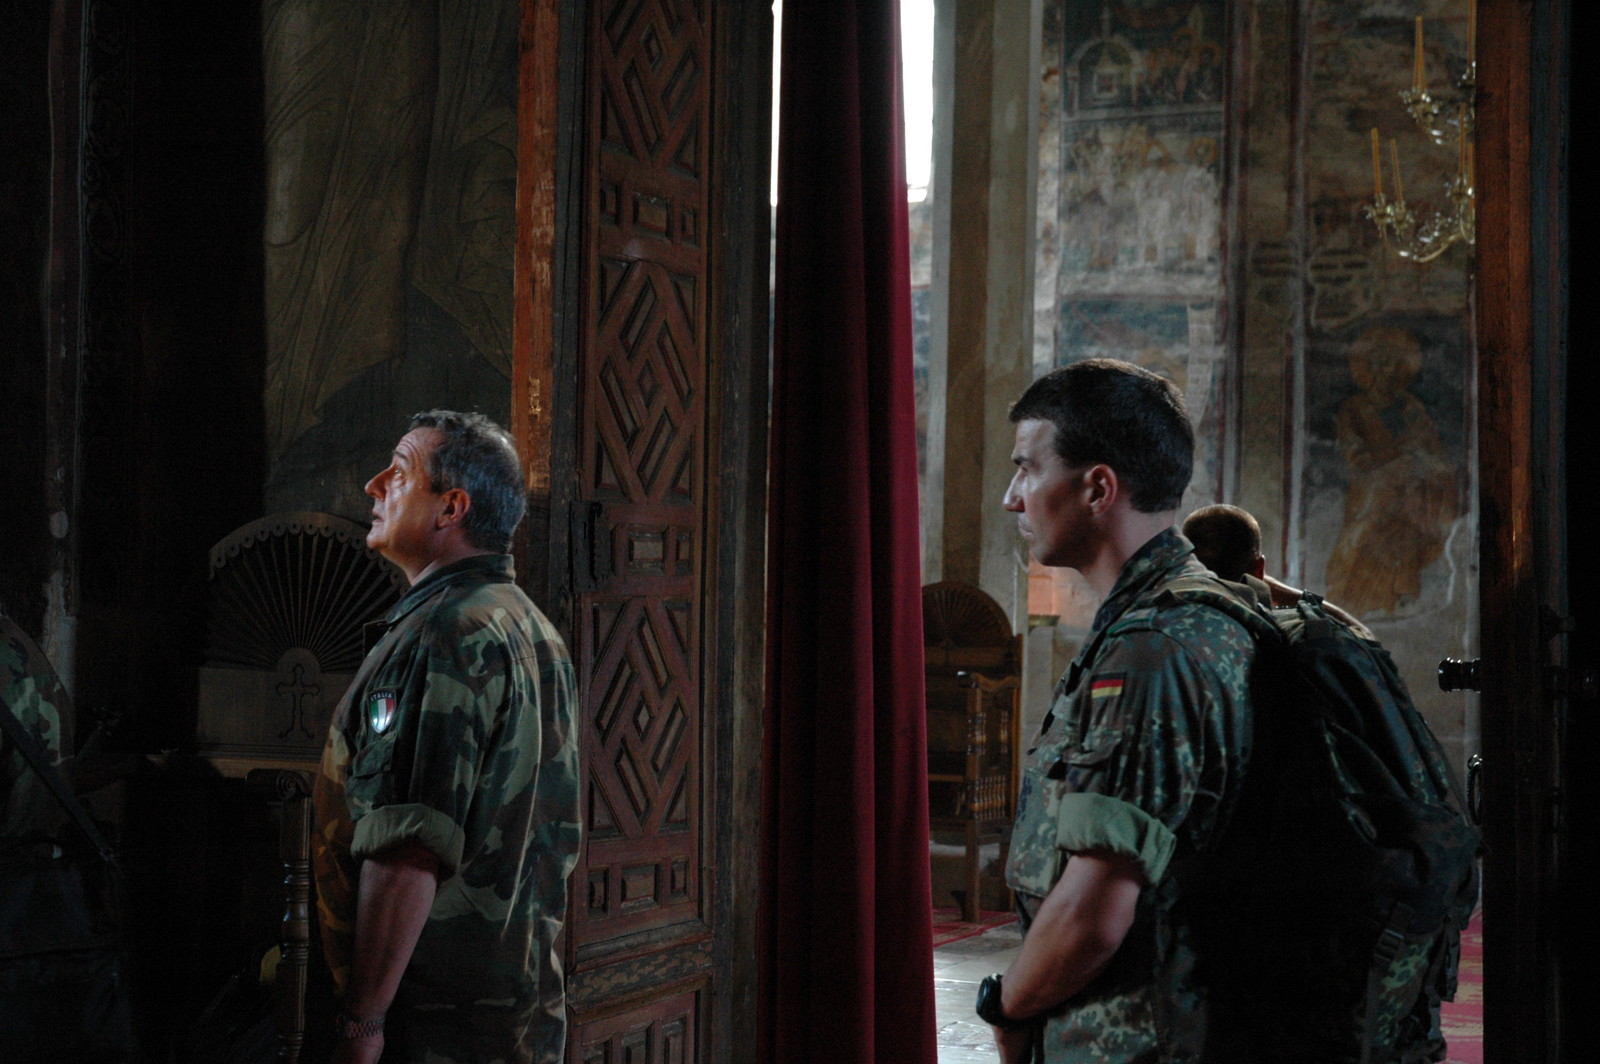 KFOR Soldiers visiting the Monastery 4